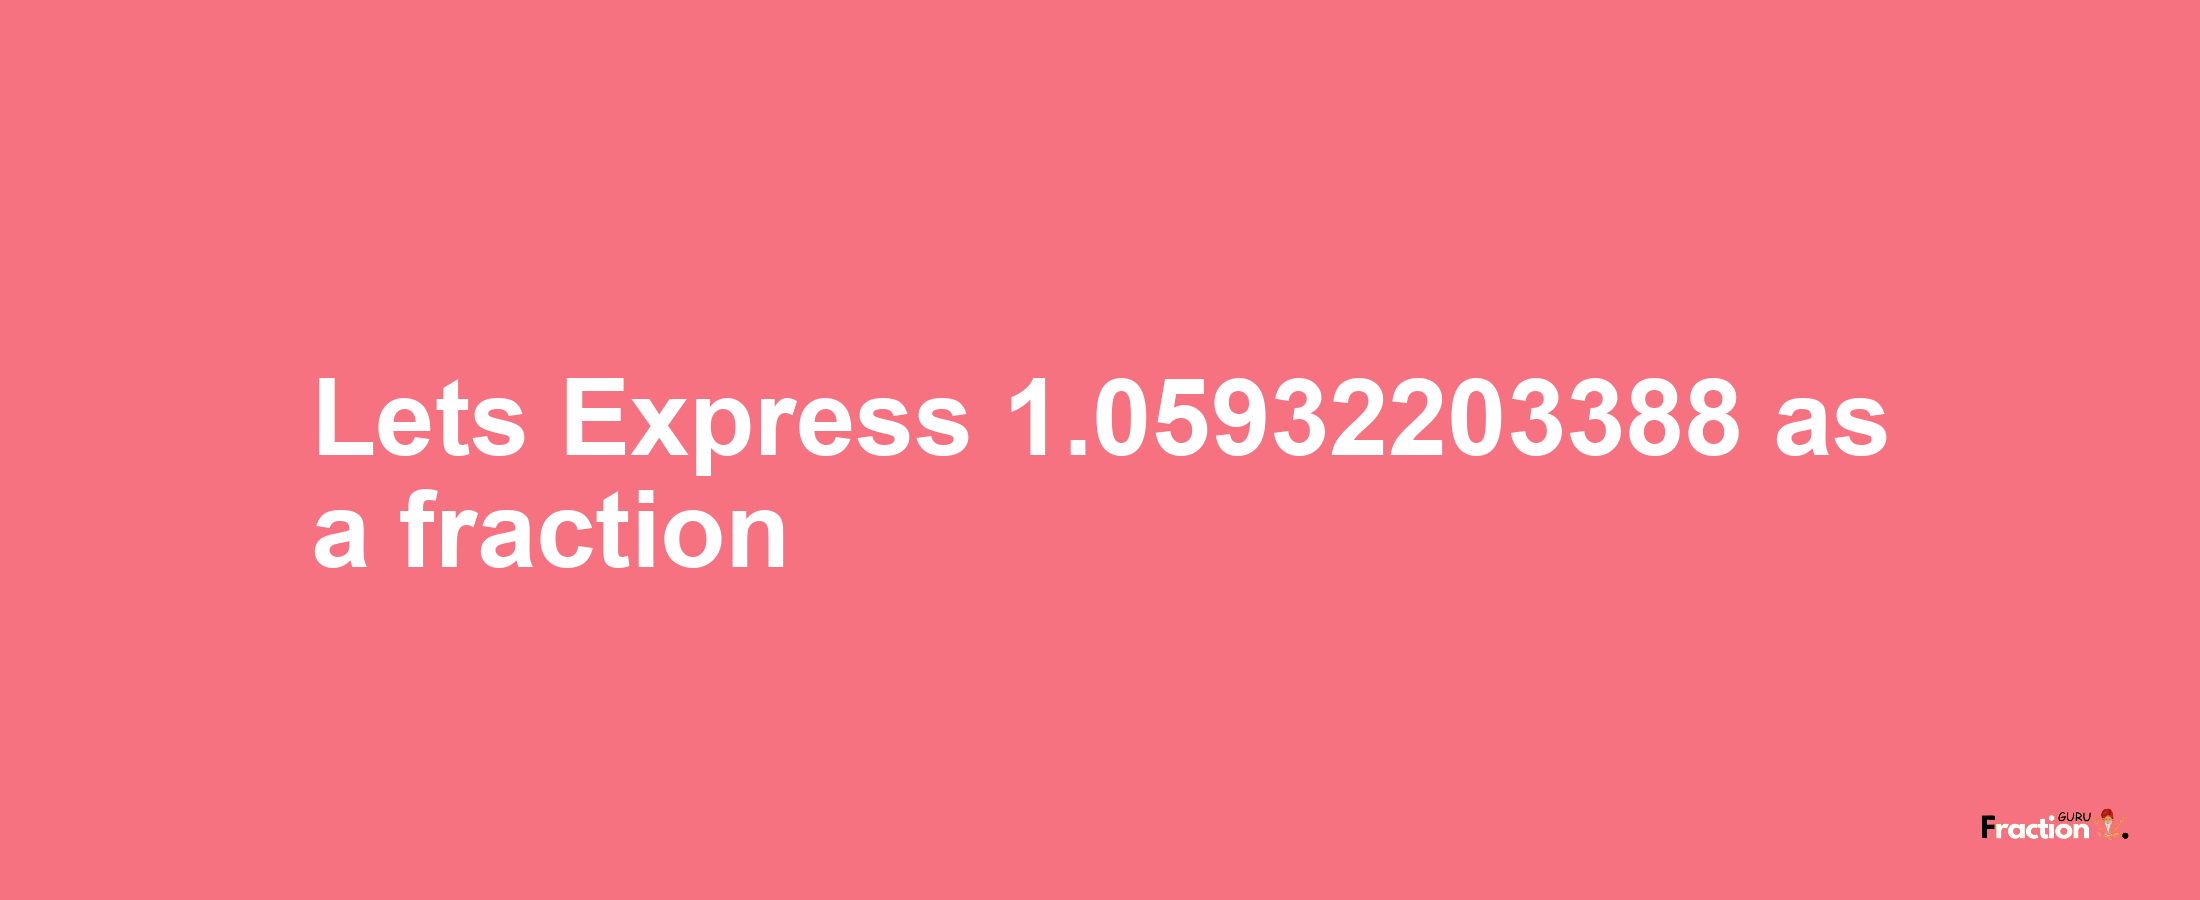 Lets Express 1.05932203388 as afraction